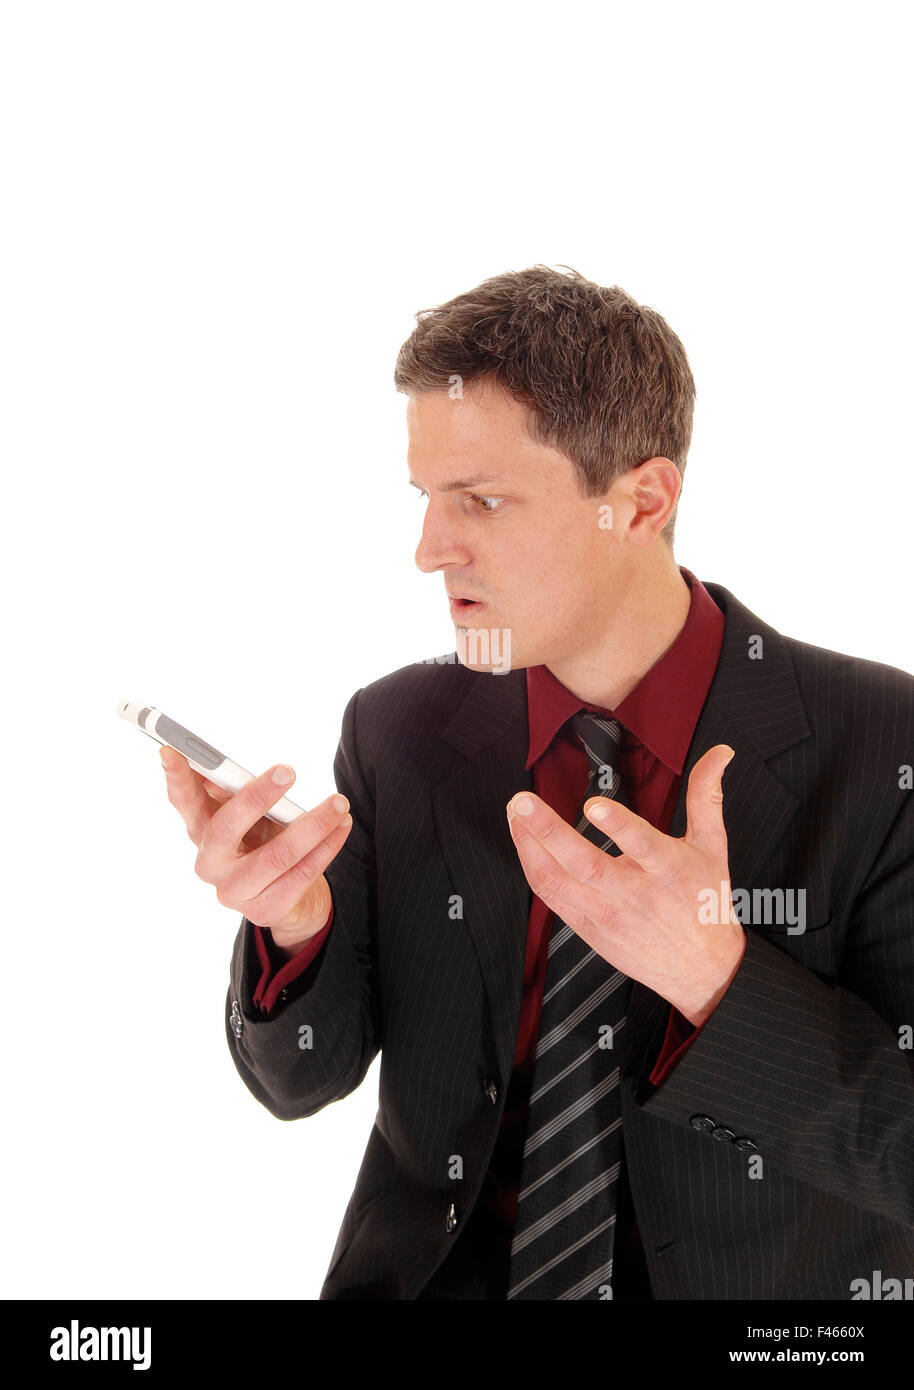 Man screaming in cell phone. Stock Photo